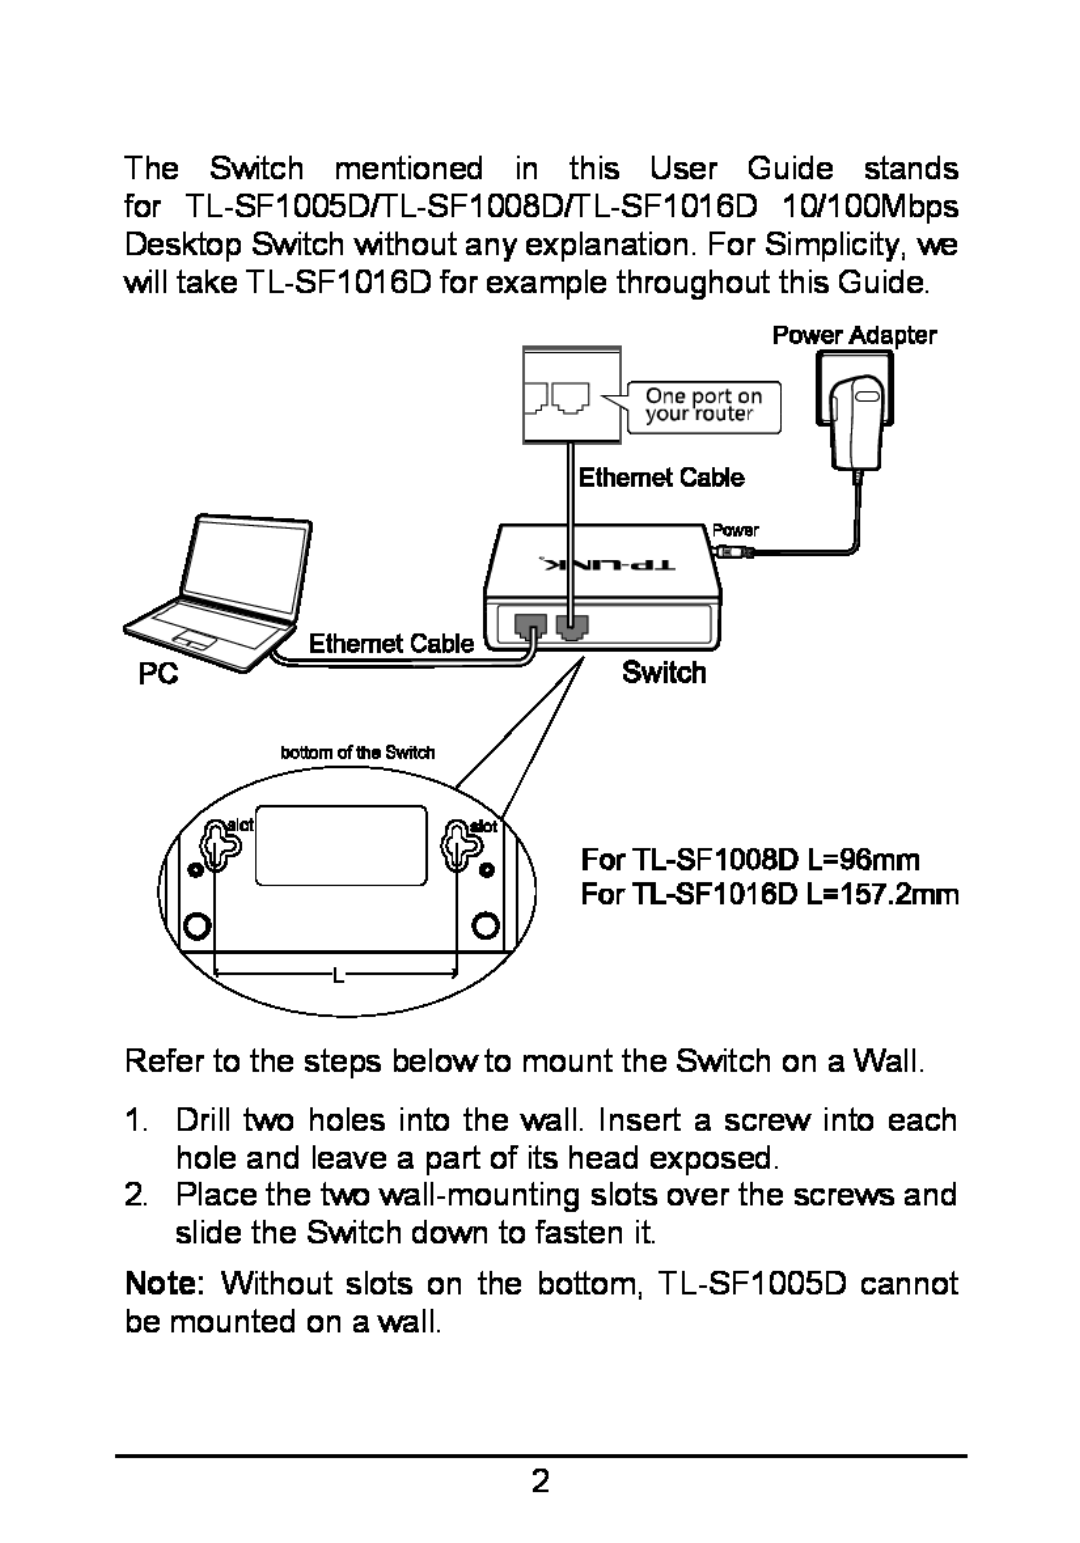 TP-Link TL-SF1005D manual Refer to the steps below to mount the Switch on a Wall 